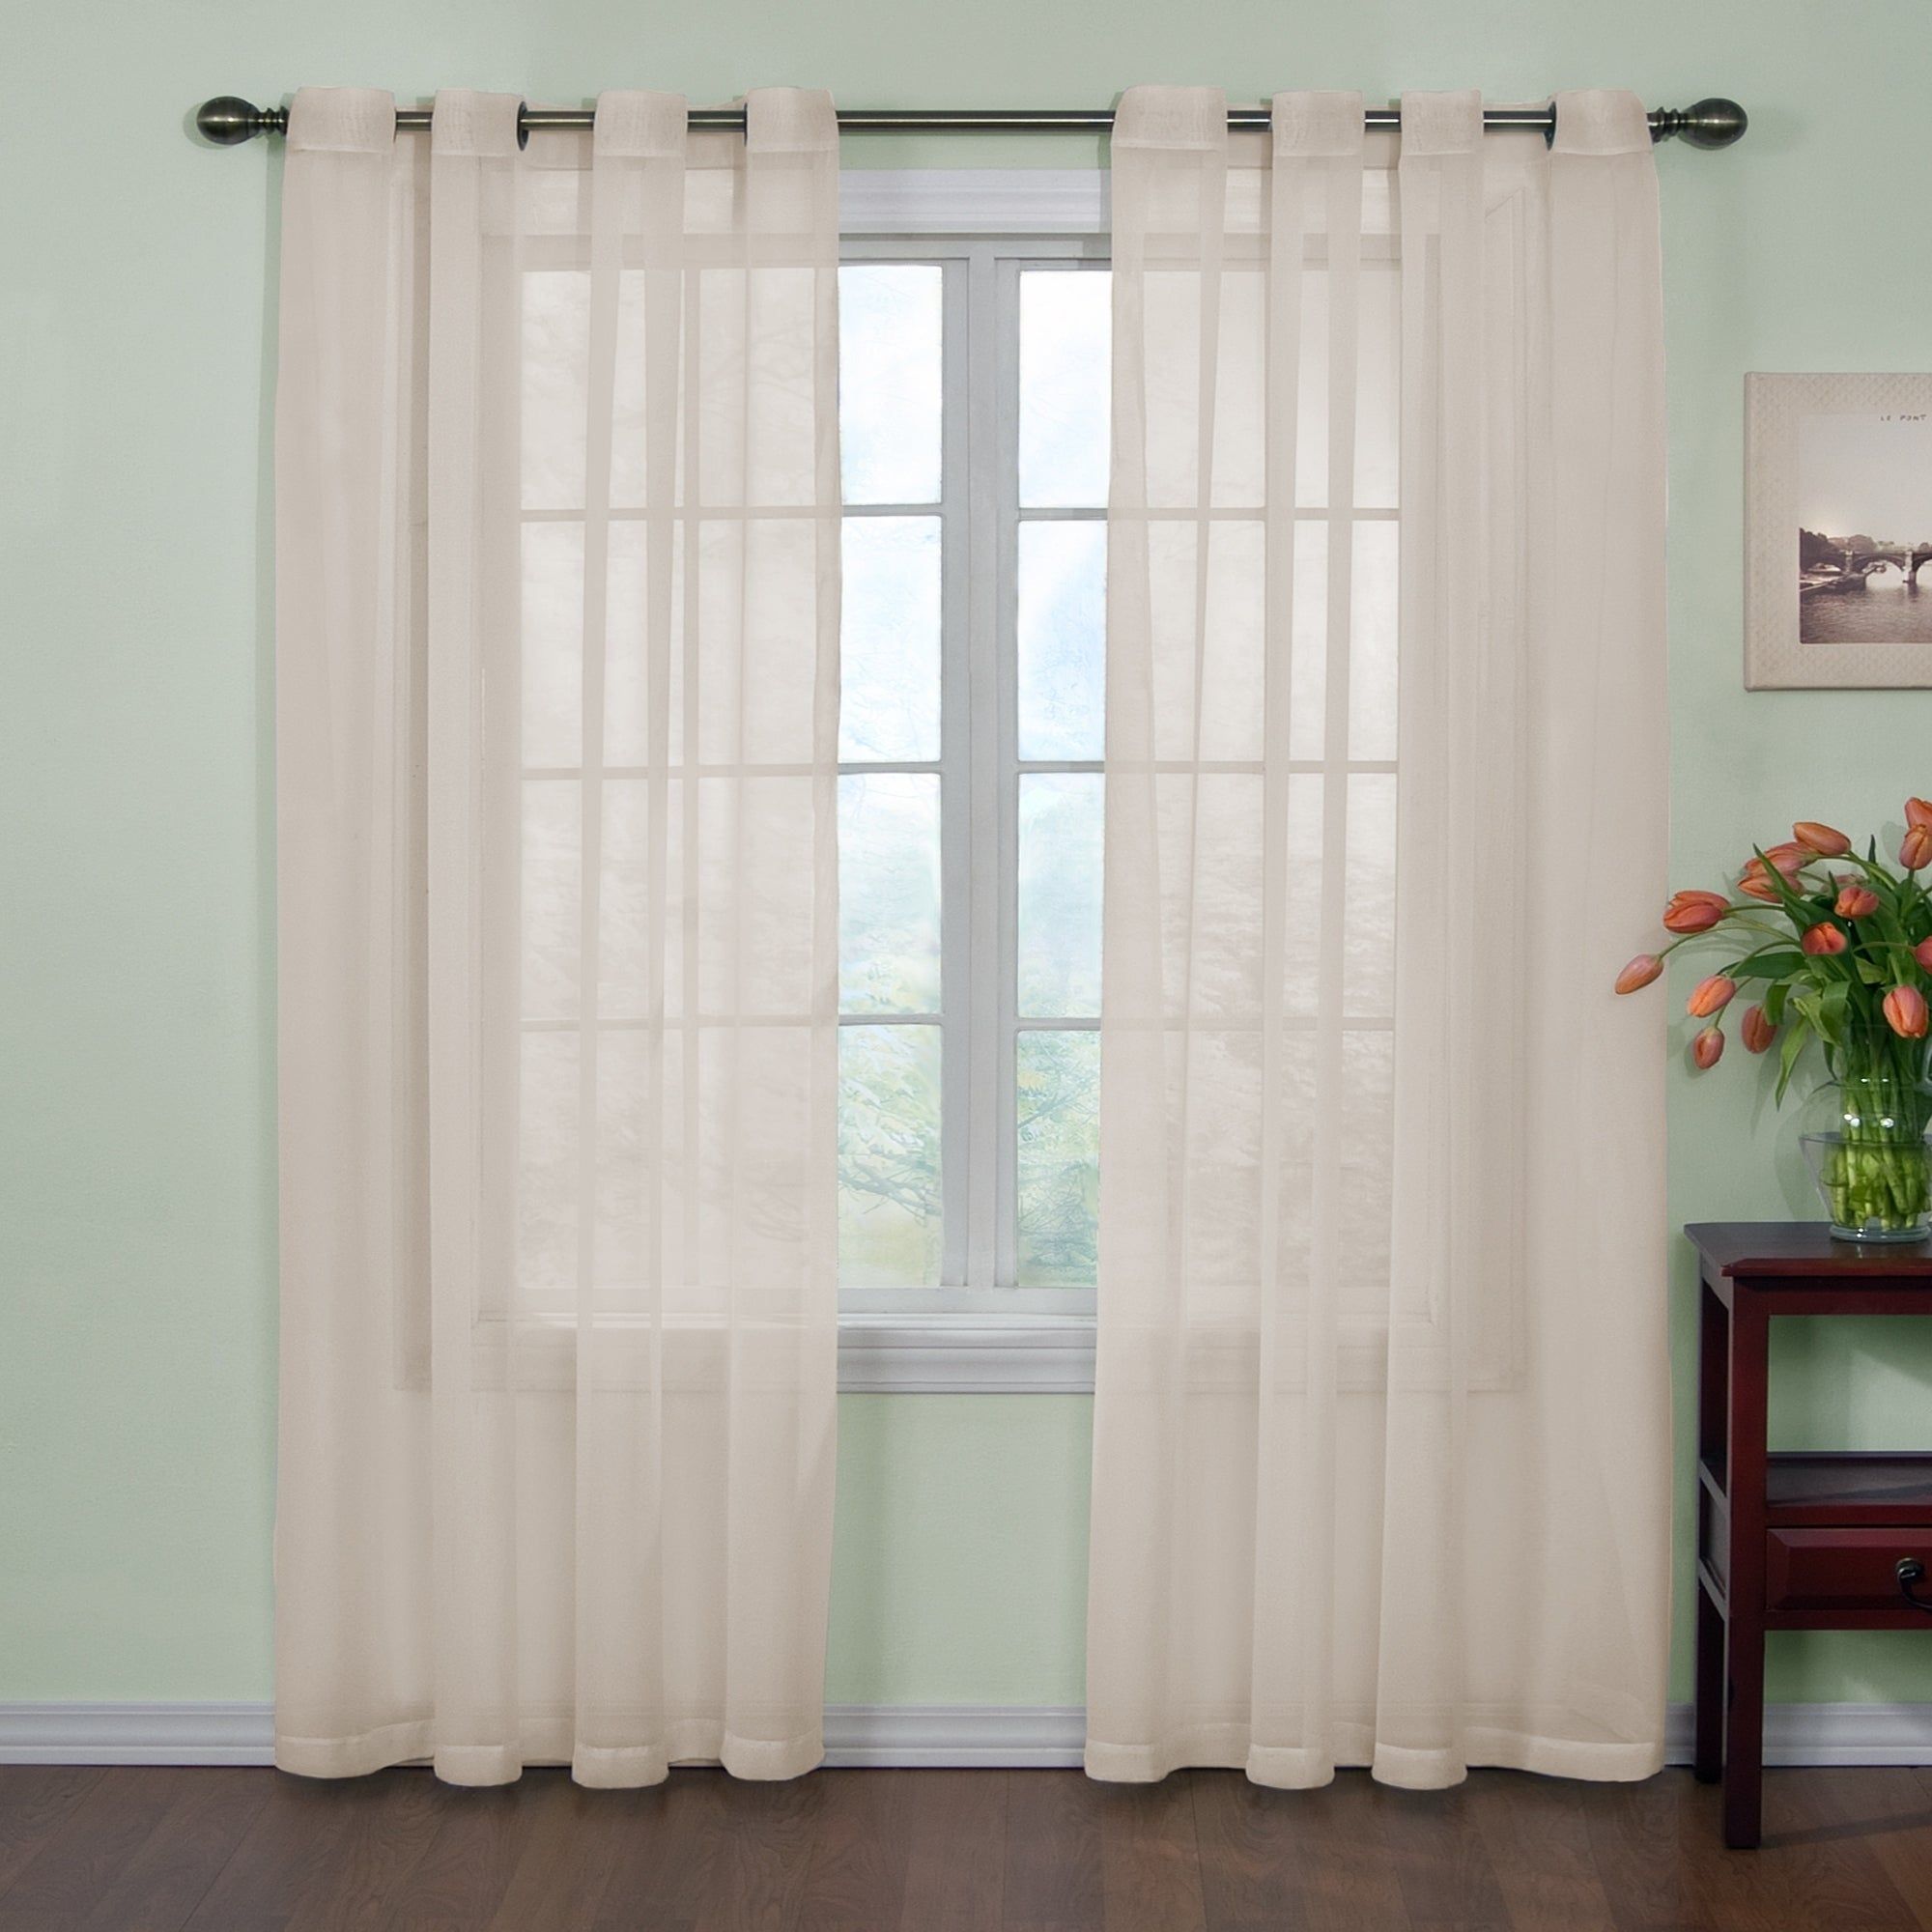 Arm And Hammer Curtain Fresh Odor Neutralizing Single Curtain Panel Intended For Arm And Hammer Curtains Fresh Odor Neutralizing Single Curtain Panels (Photo 1 of 20)